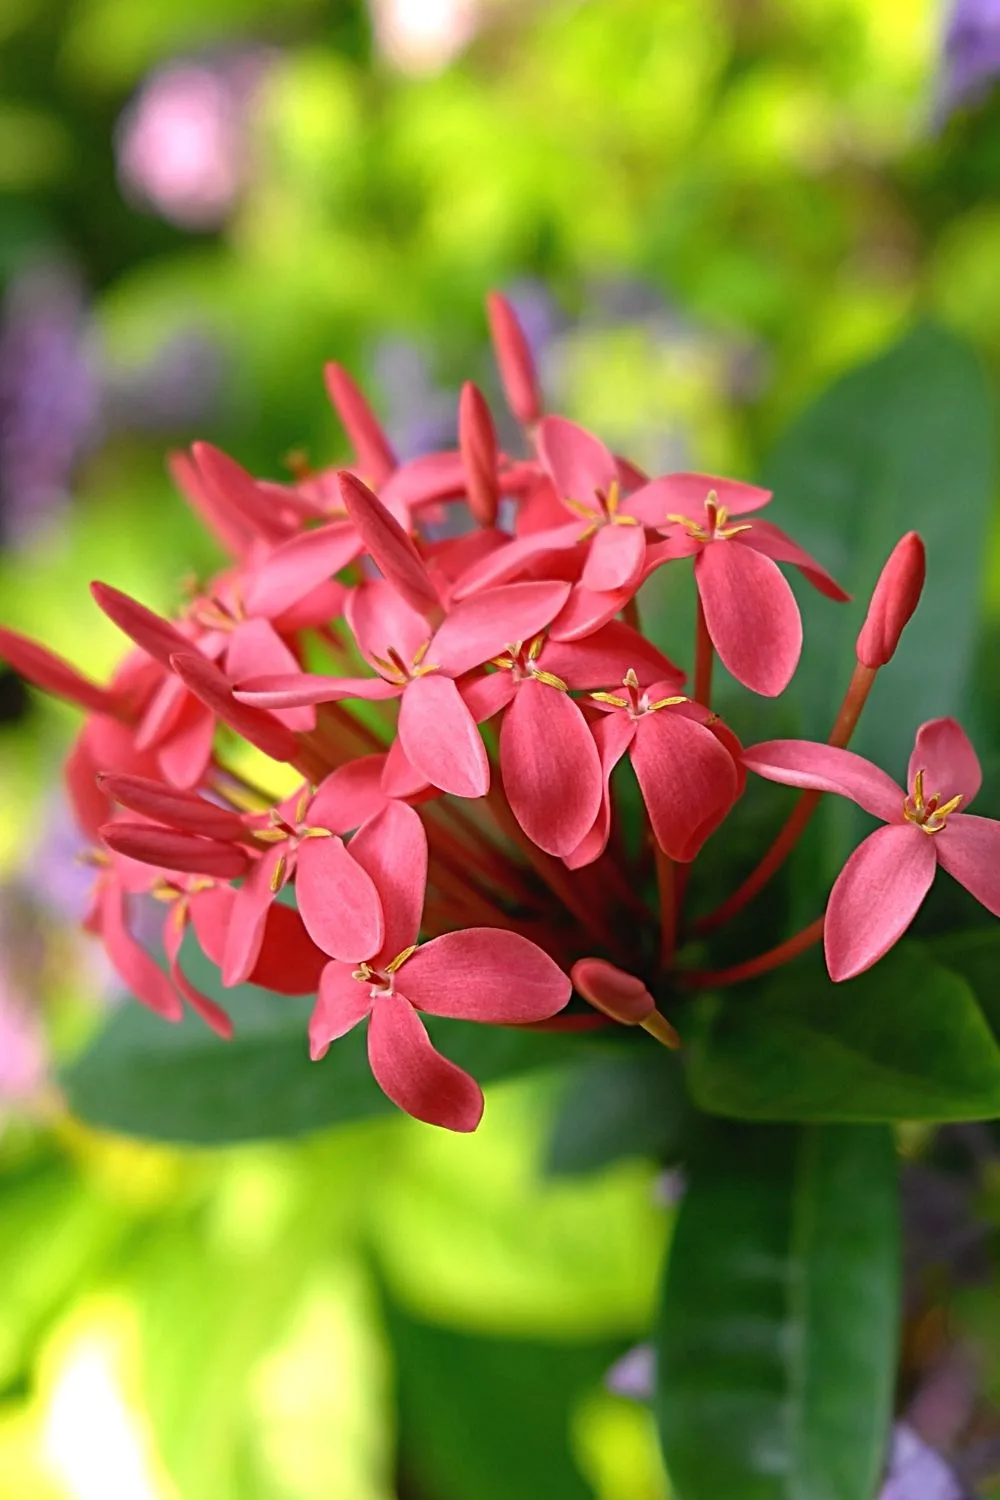 Egyptian Star Cluster has tiny, stunning flowers that grow in clusters that adds beauty to your southeast-facing garden